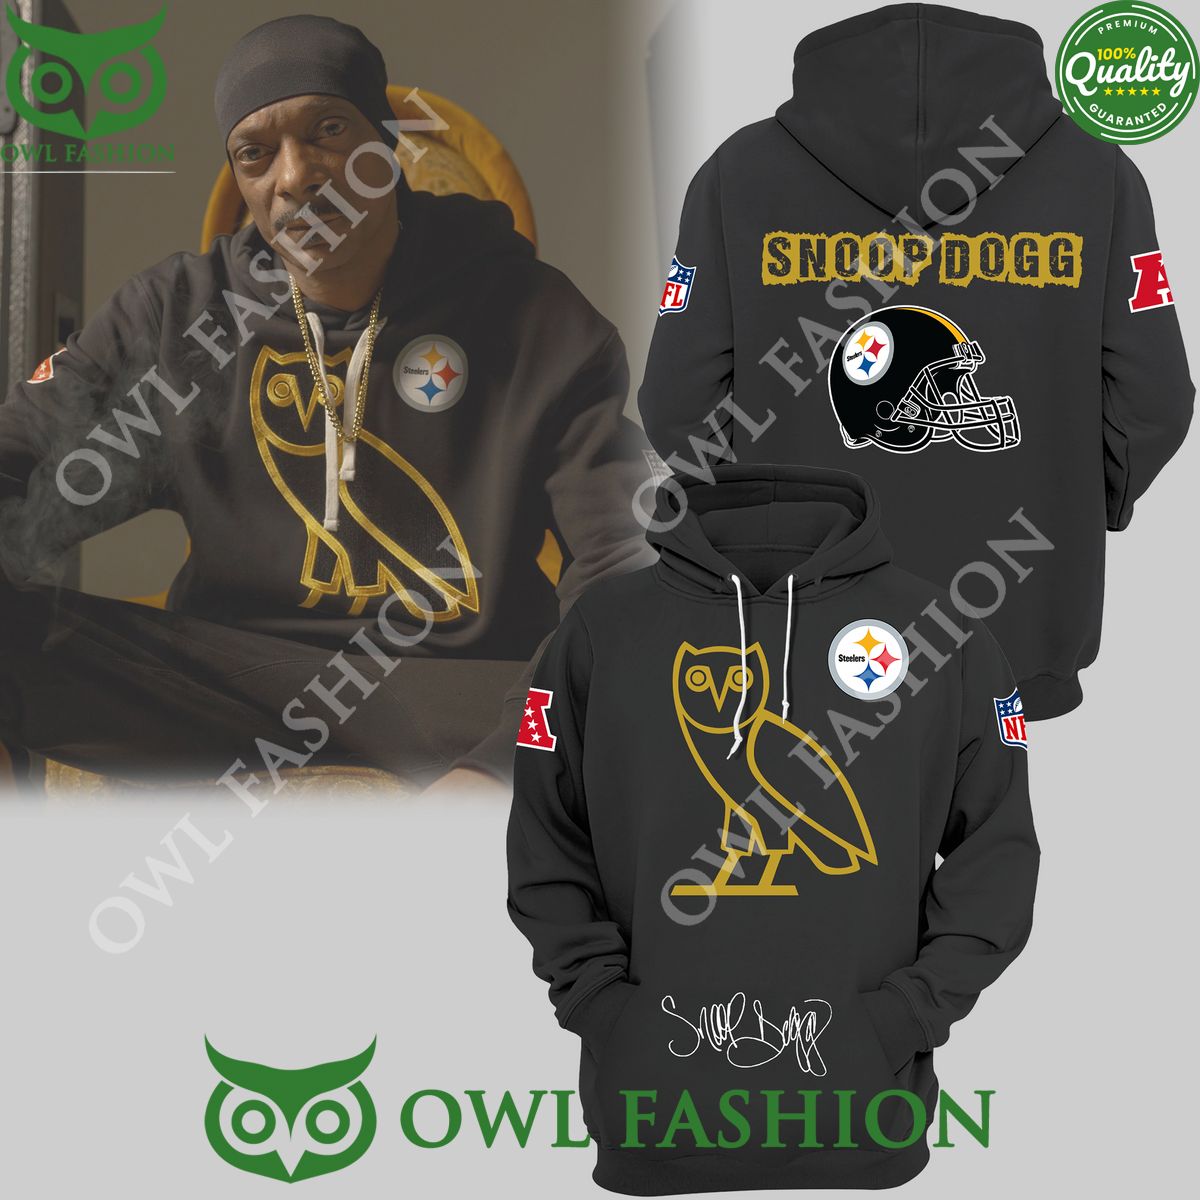 Pittsburgh Steelers NFL football team special Snoop Dogg 3d hoodie and pant